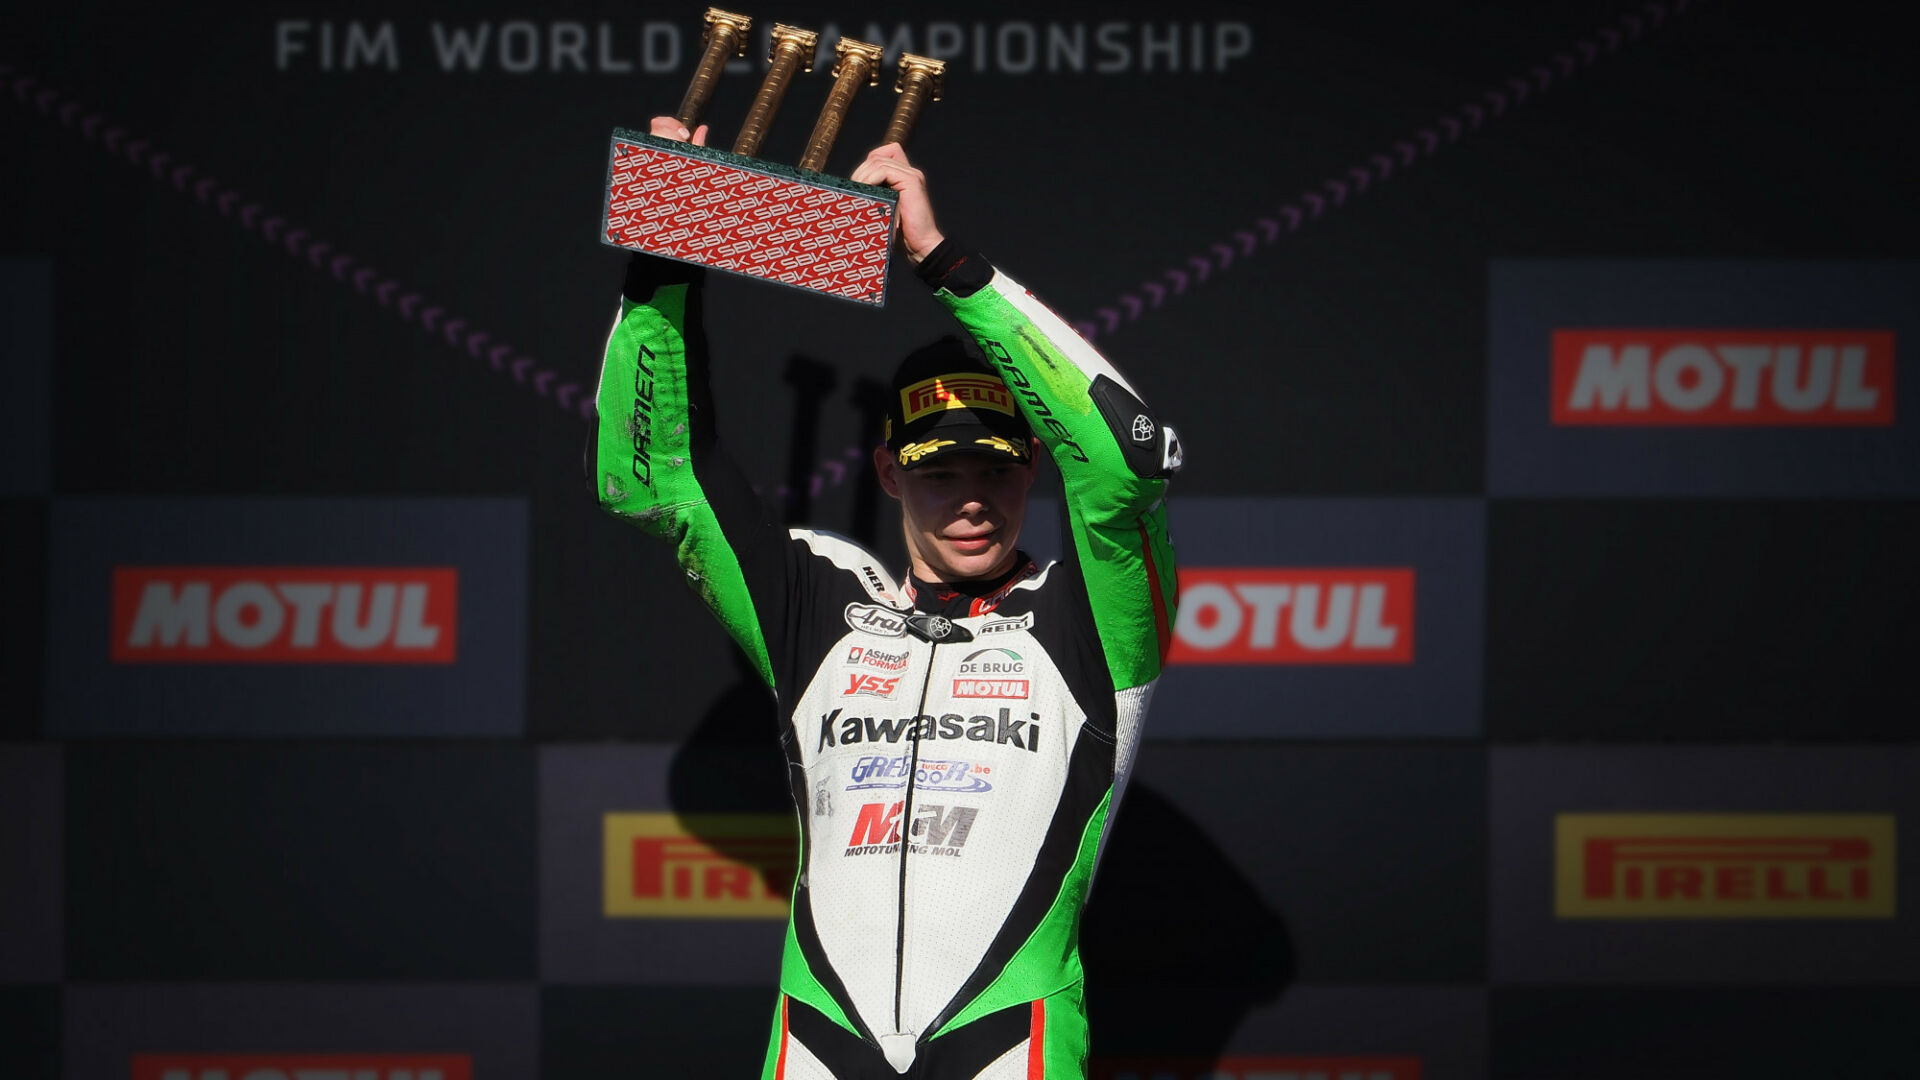 Victor Steeman, after winning World Supersport 300 Race Two at Catalunya. R.I.P. Photo courtesy Dorna.